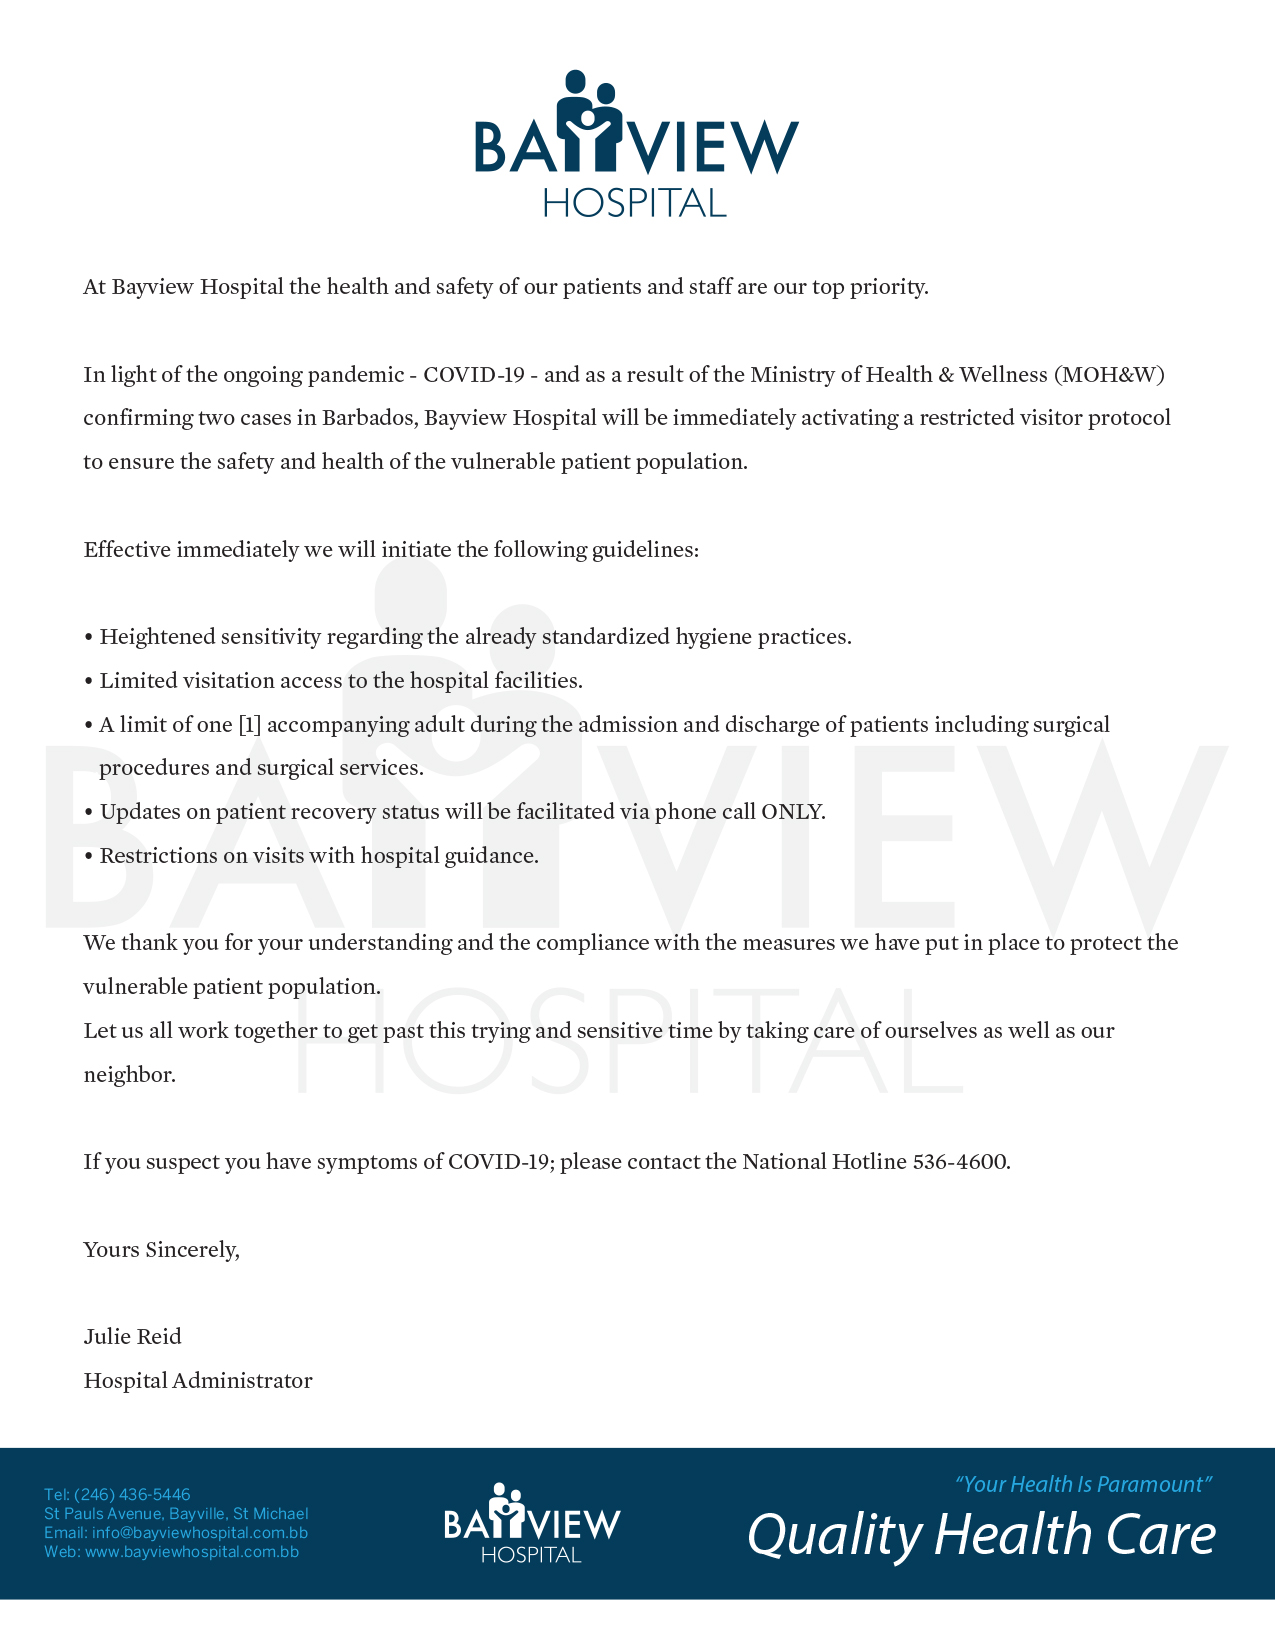 Bayview Memo from Hospital Administrator